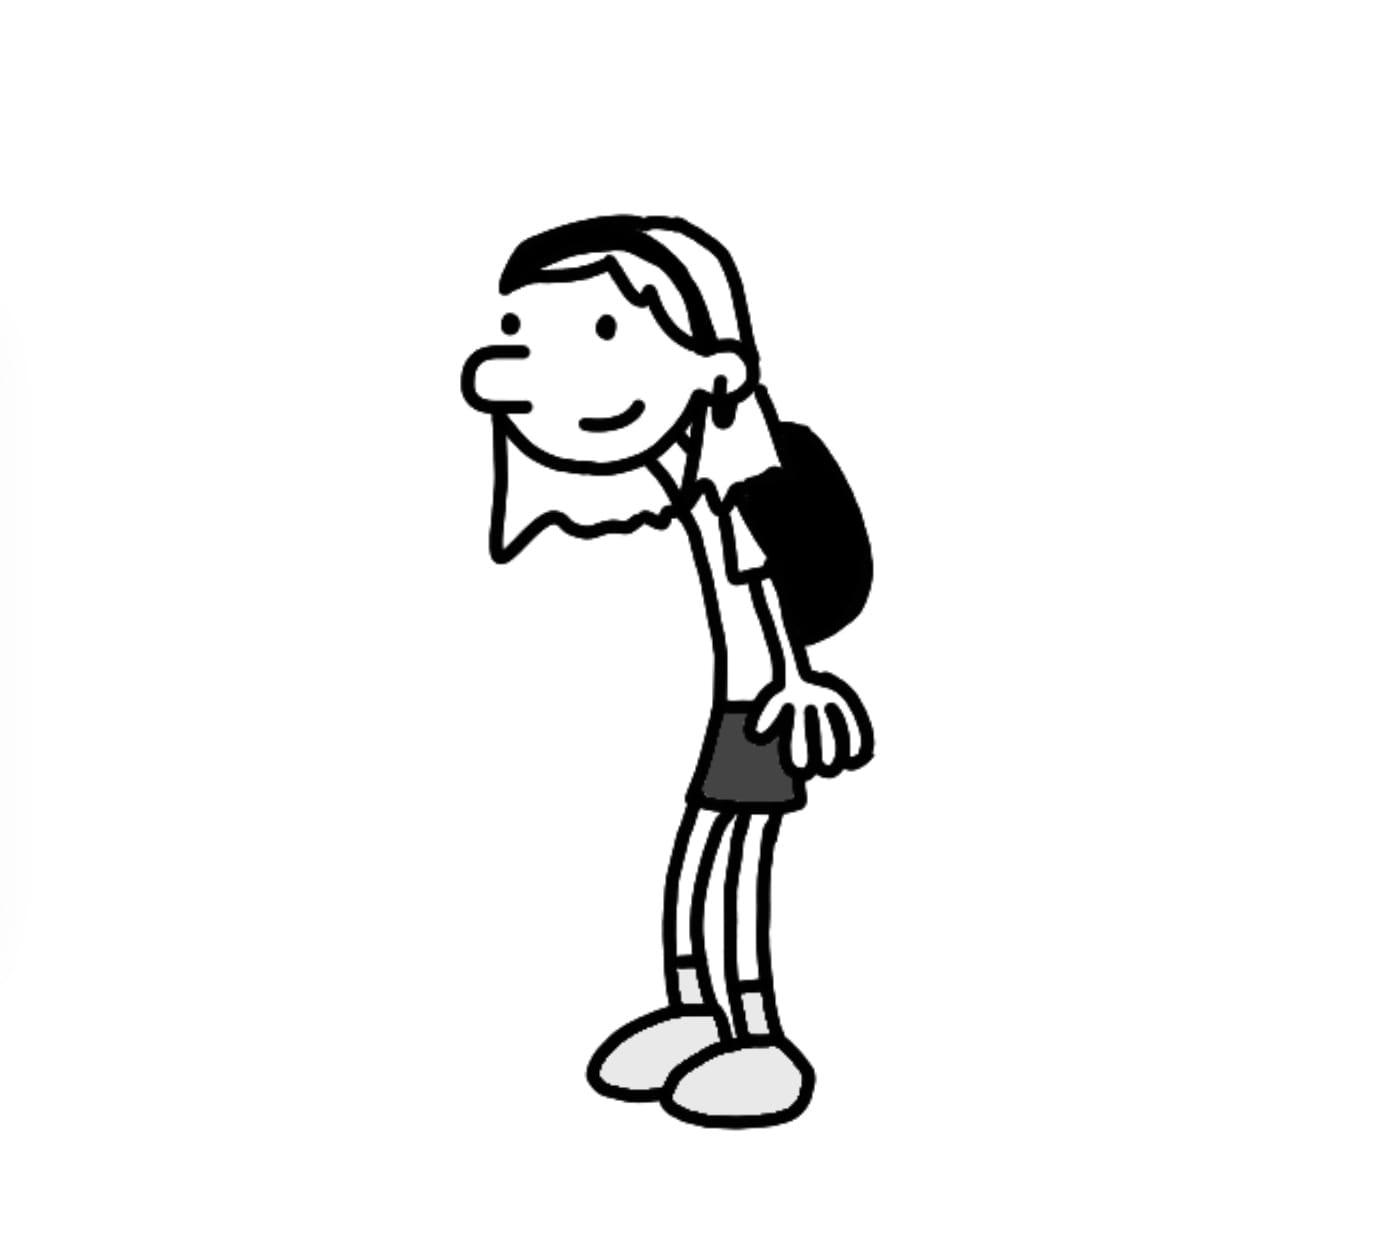 Draw You As A Diary Of Wimpy Kid Character By Wfayec Fiverr